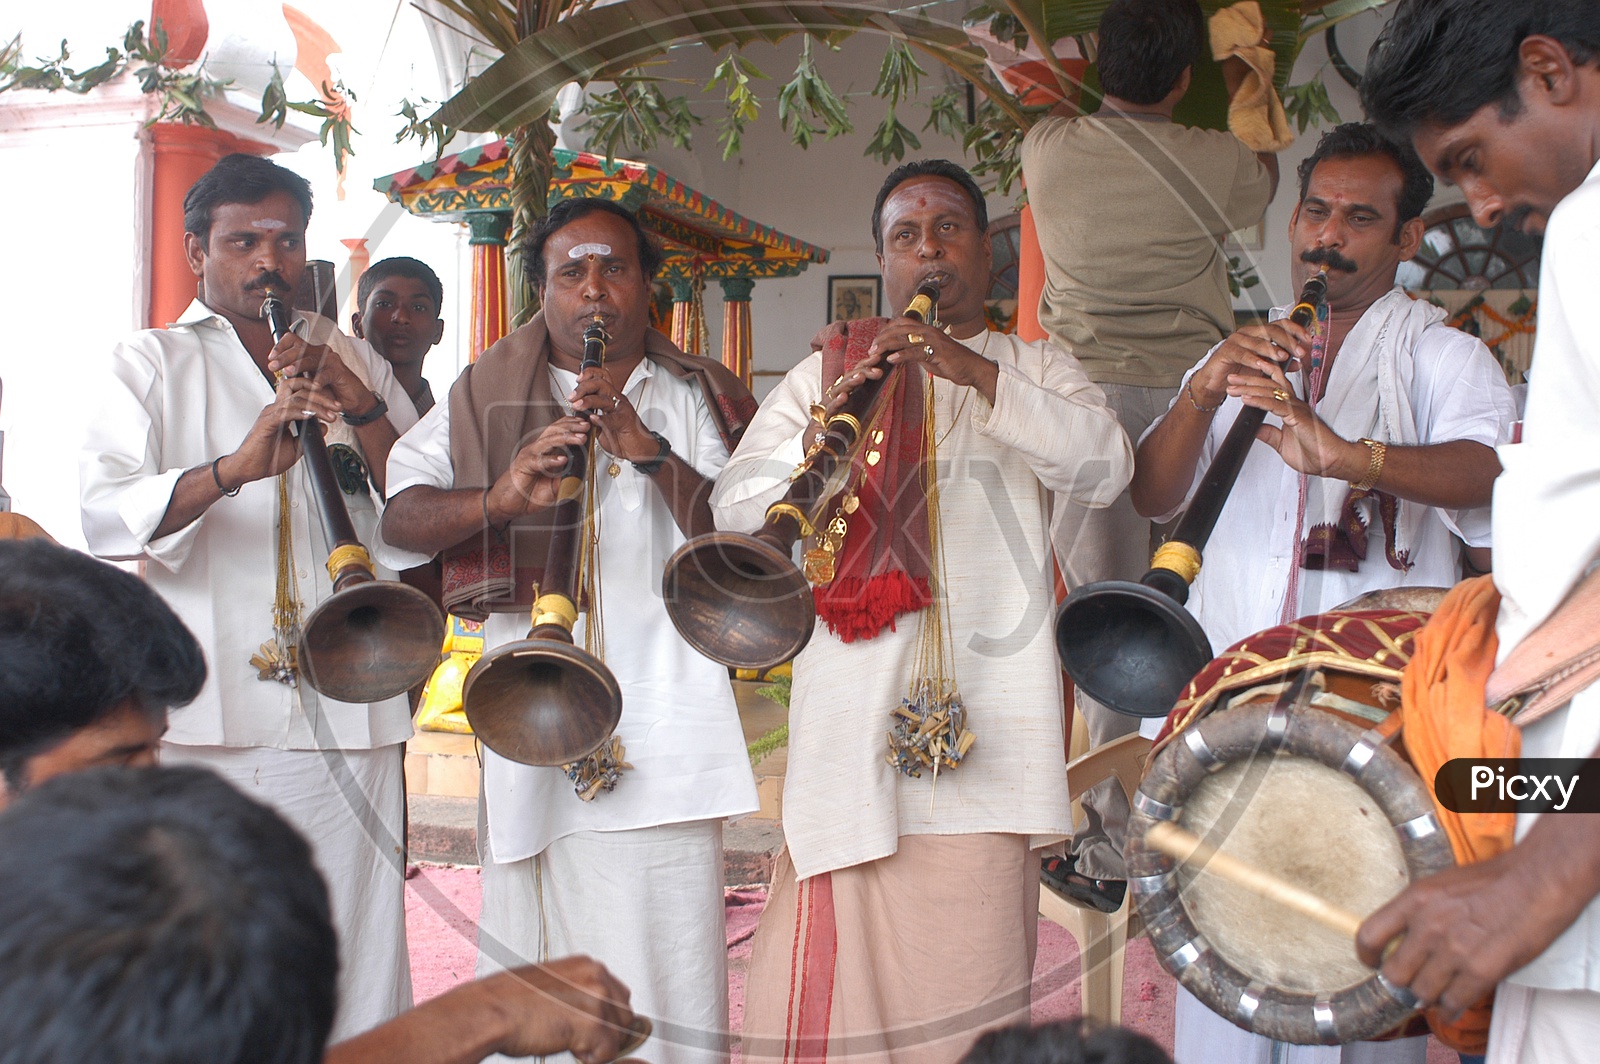 Traditional Musicians Playing Drums And Sannai In a Wedding